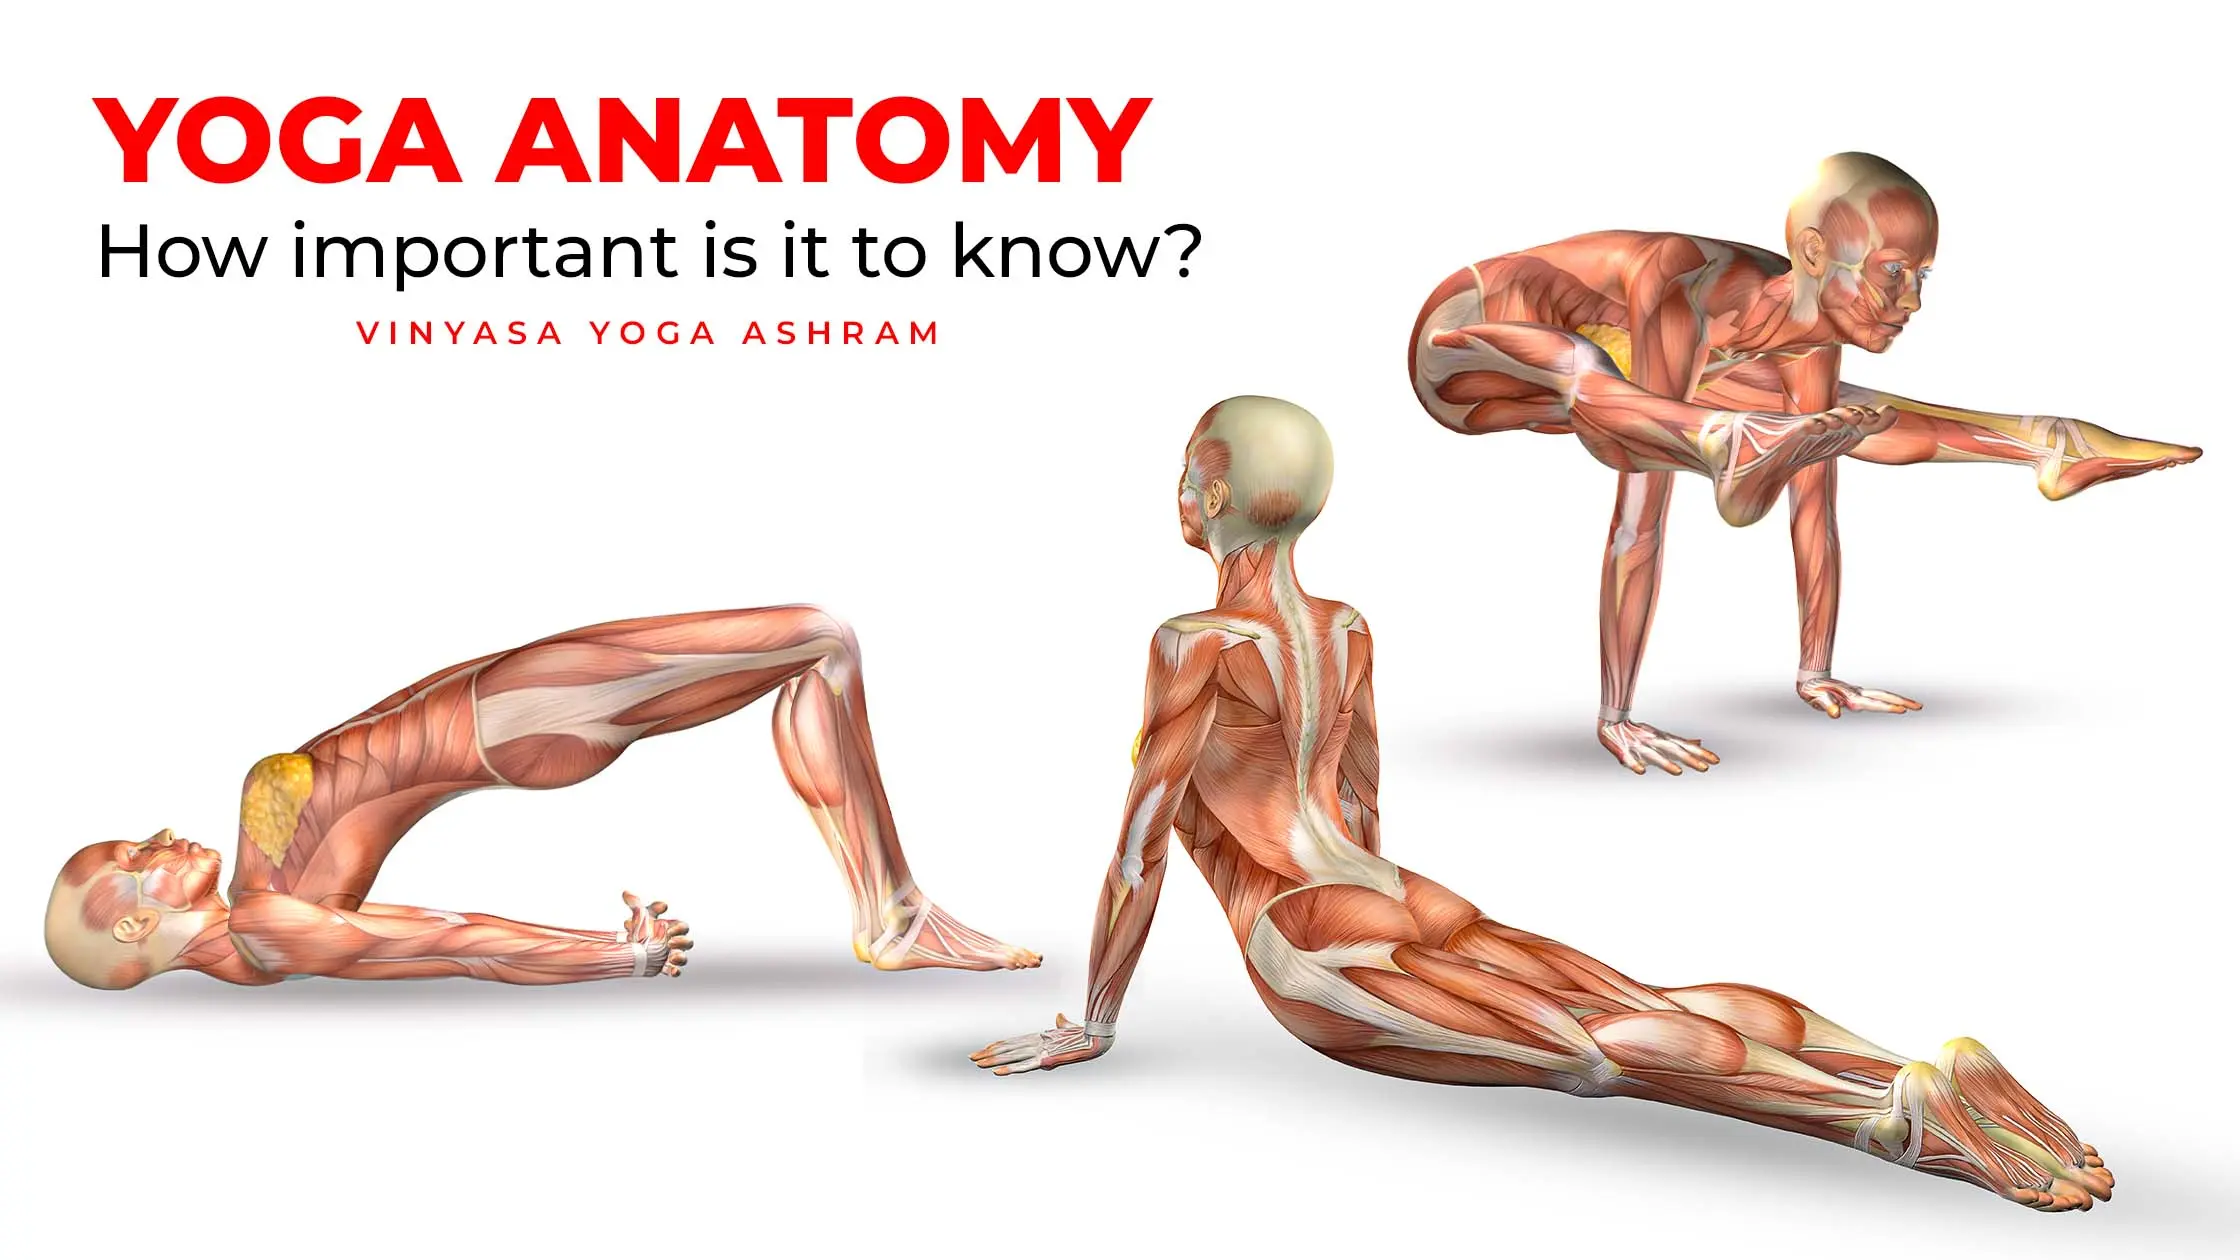 yoga anatomy course - What is anatomy in yoga